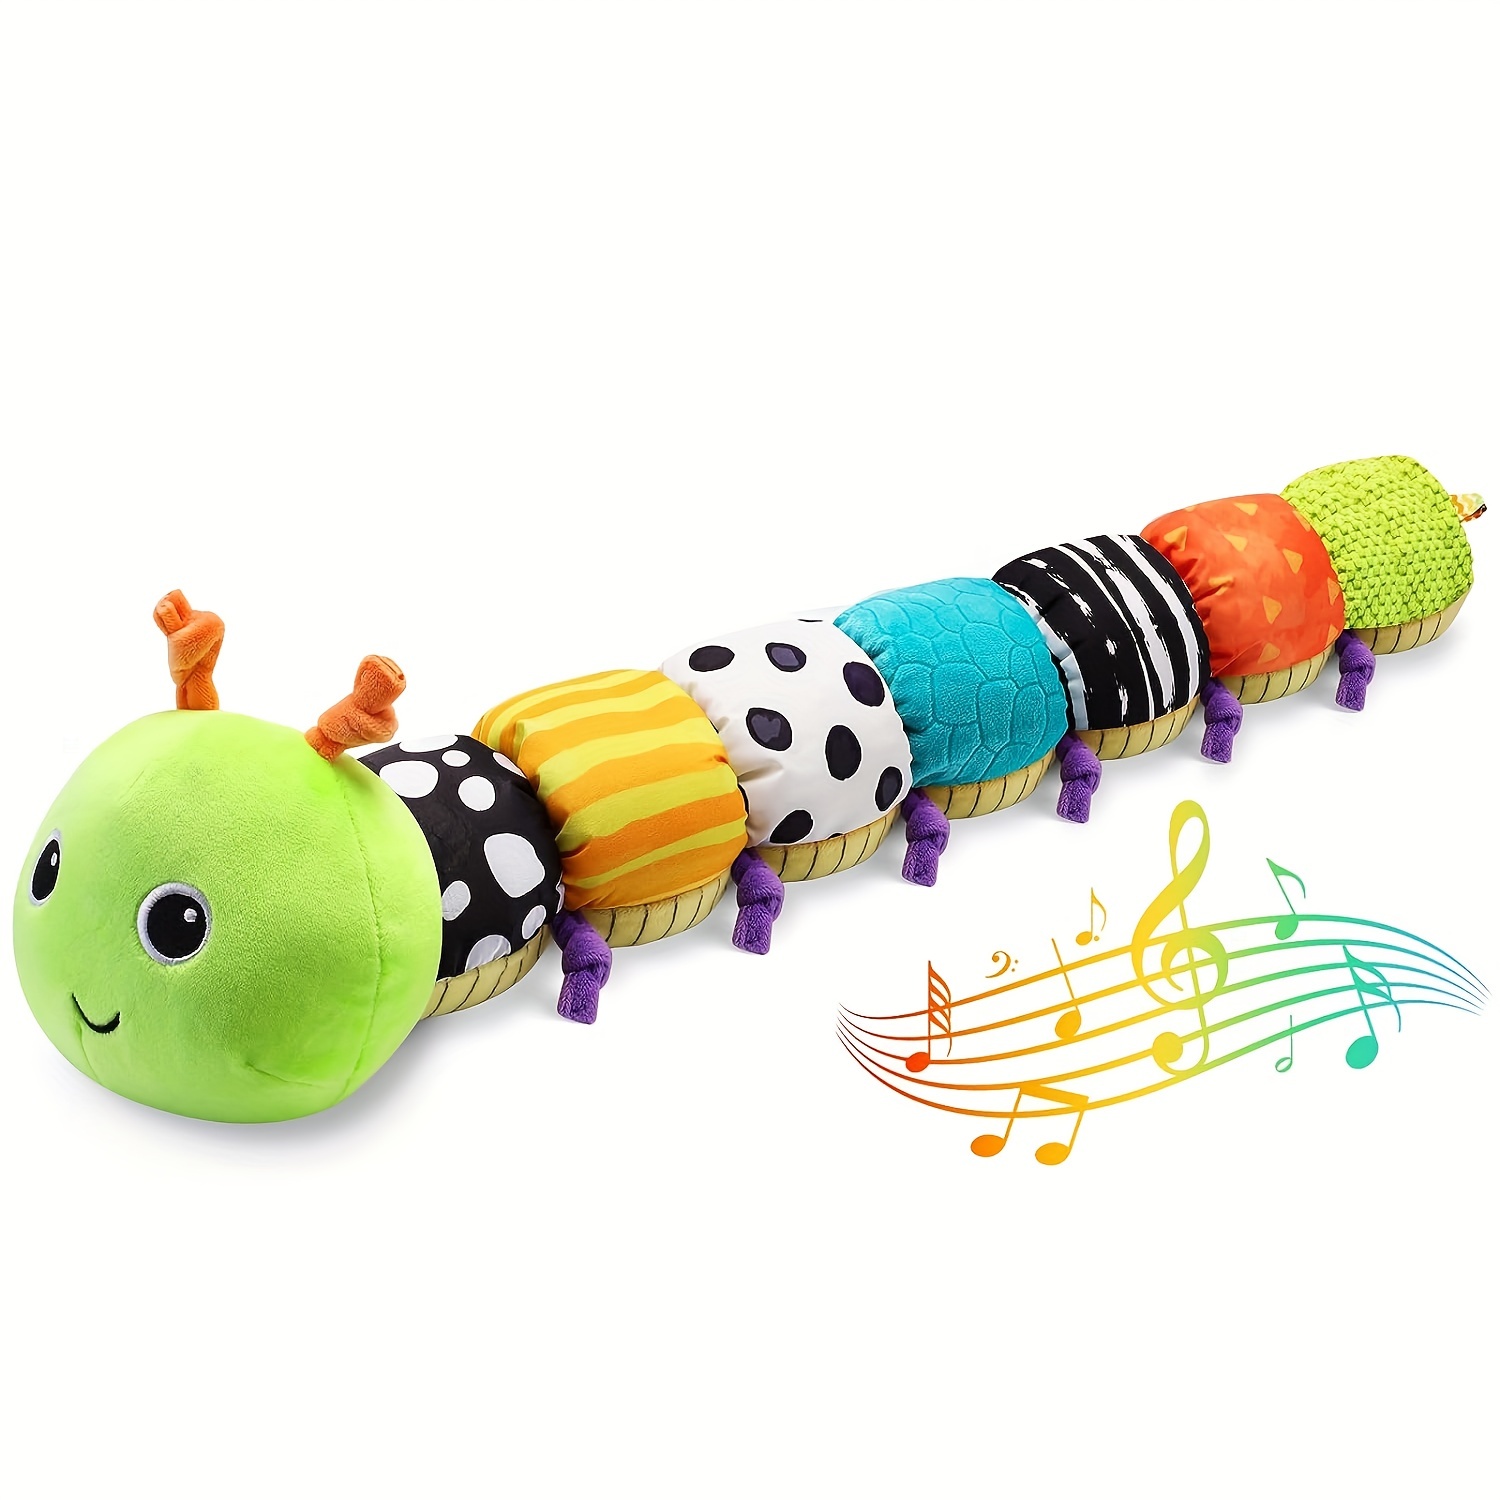 Baby Musical Stuffed Animal Toys Activity Soft Toys with Ruler